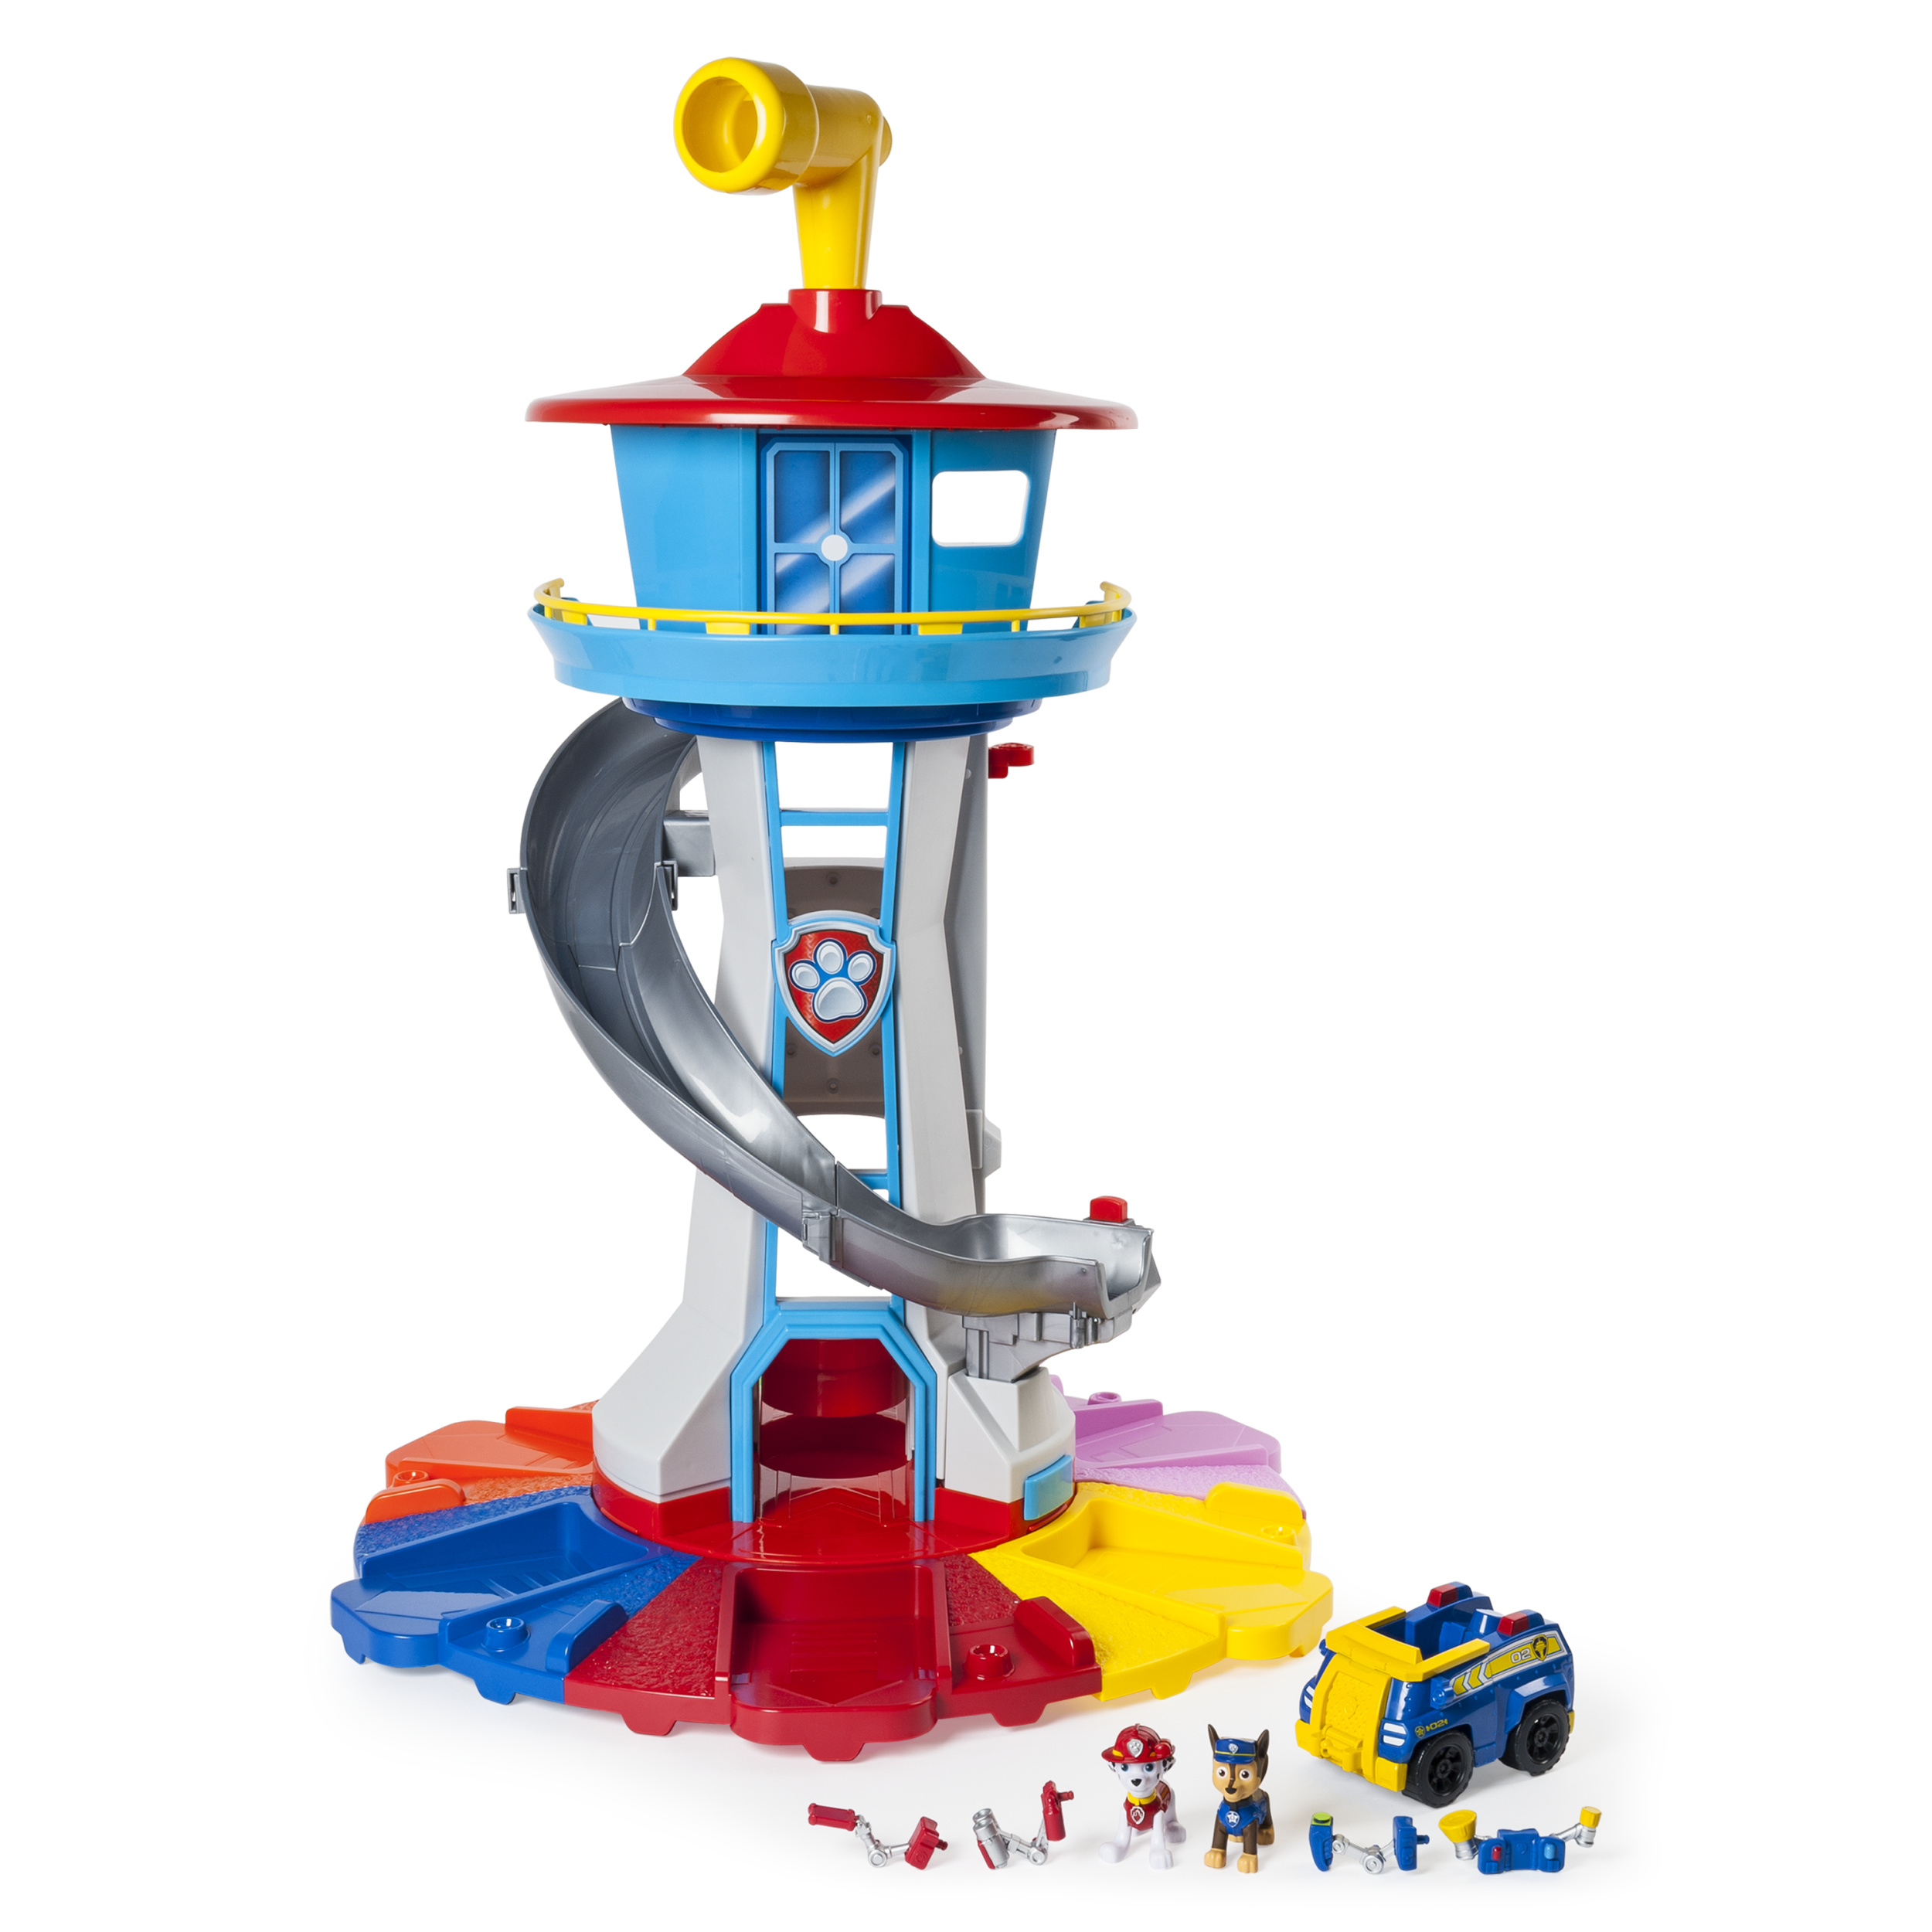 Paw Patrol - My Size Lookout Tower with Exclusive Vehicle, Rotating Periscope and Lights and Sounds - image 1 of 8